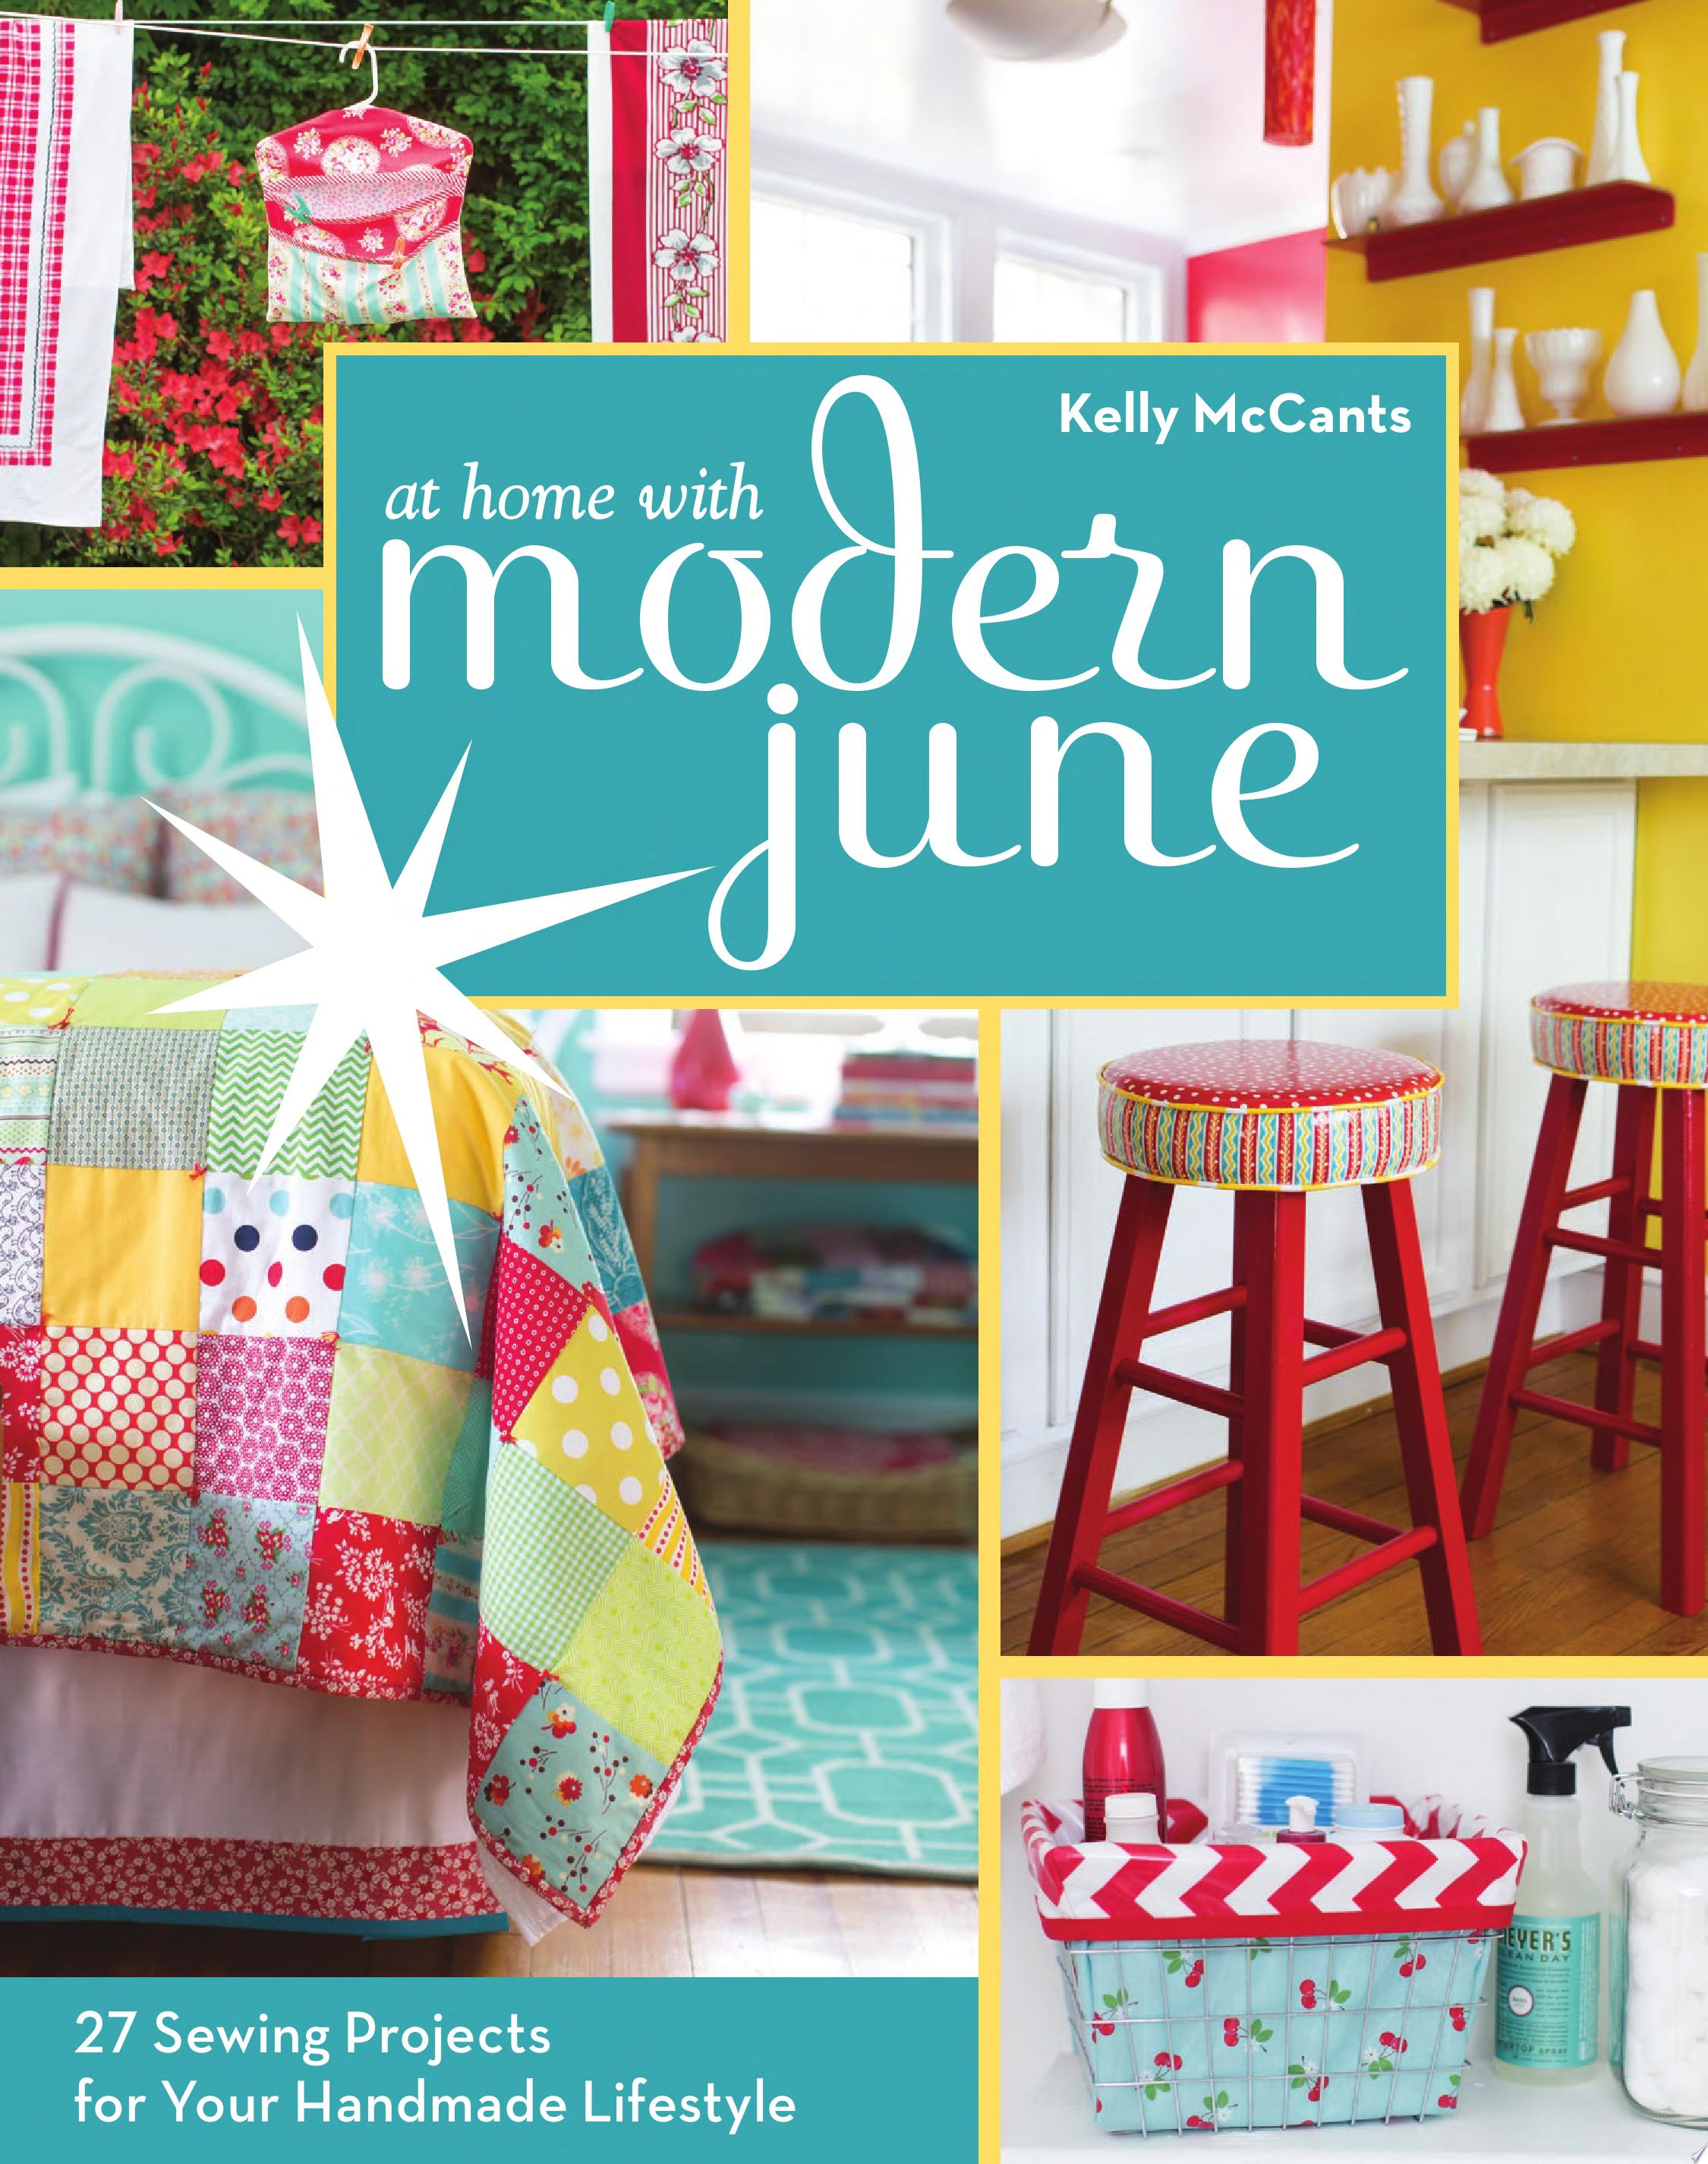 Image for "At Home with Modern June"